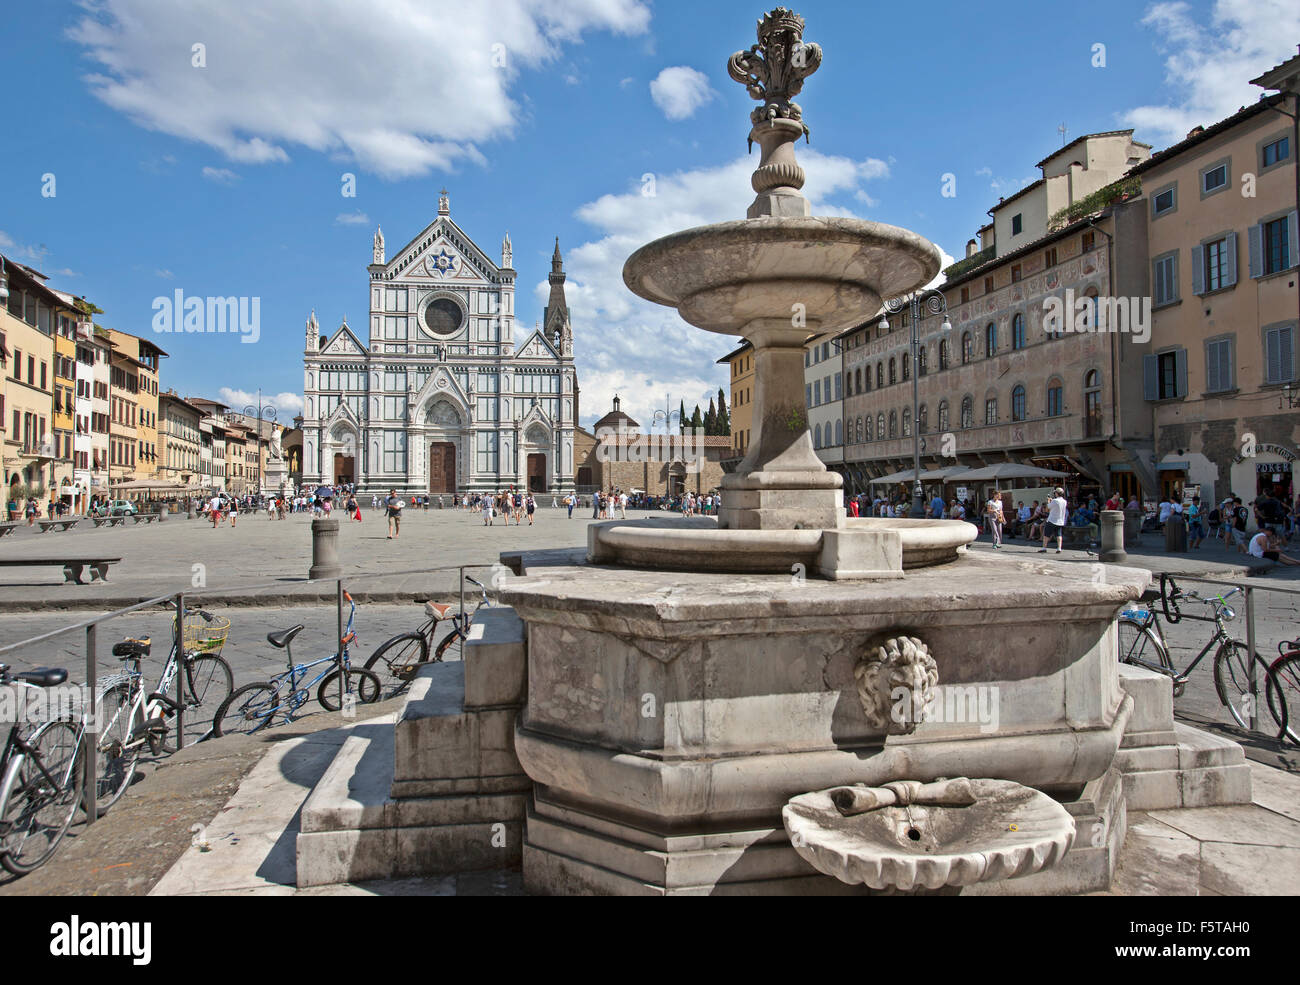 Fountain in Santa Croce square in Florence,Piazza di Santa Croce square Church of Santa Croce Basilica, Fountain by G Manetti Stock Photo